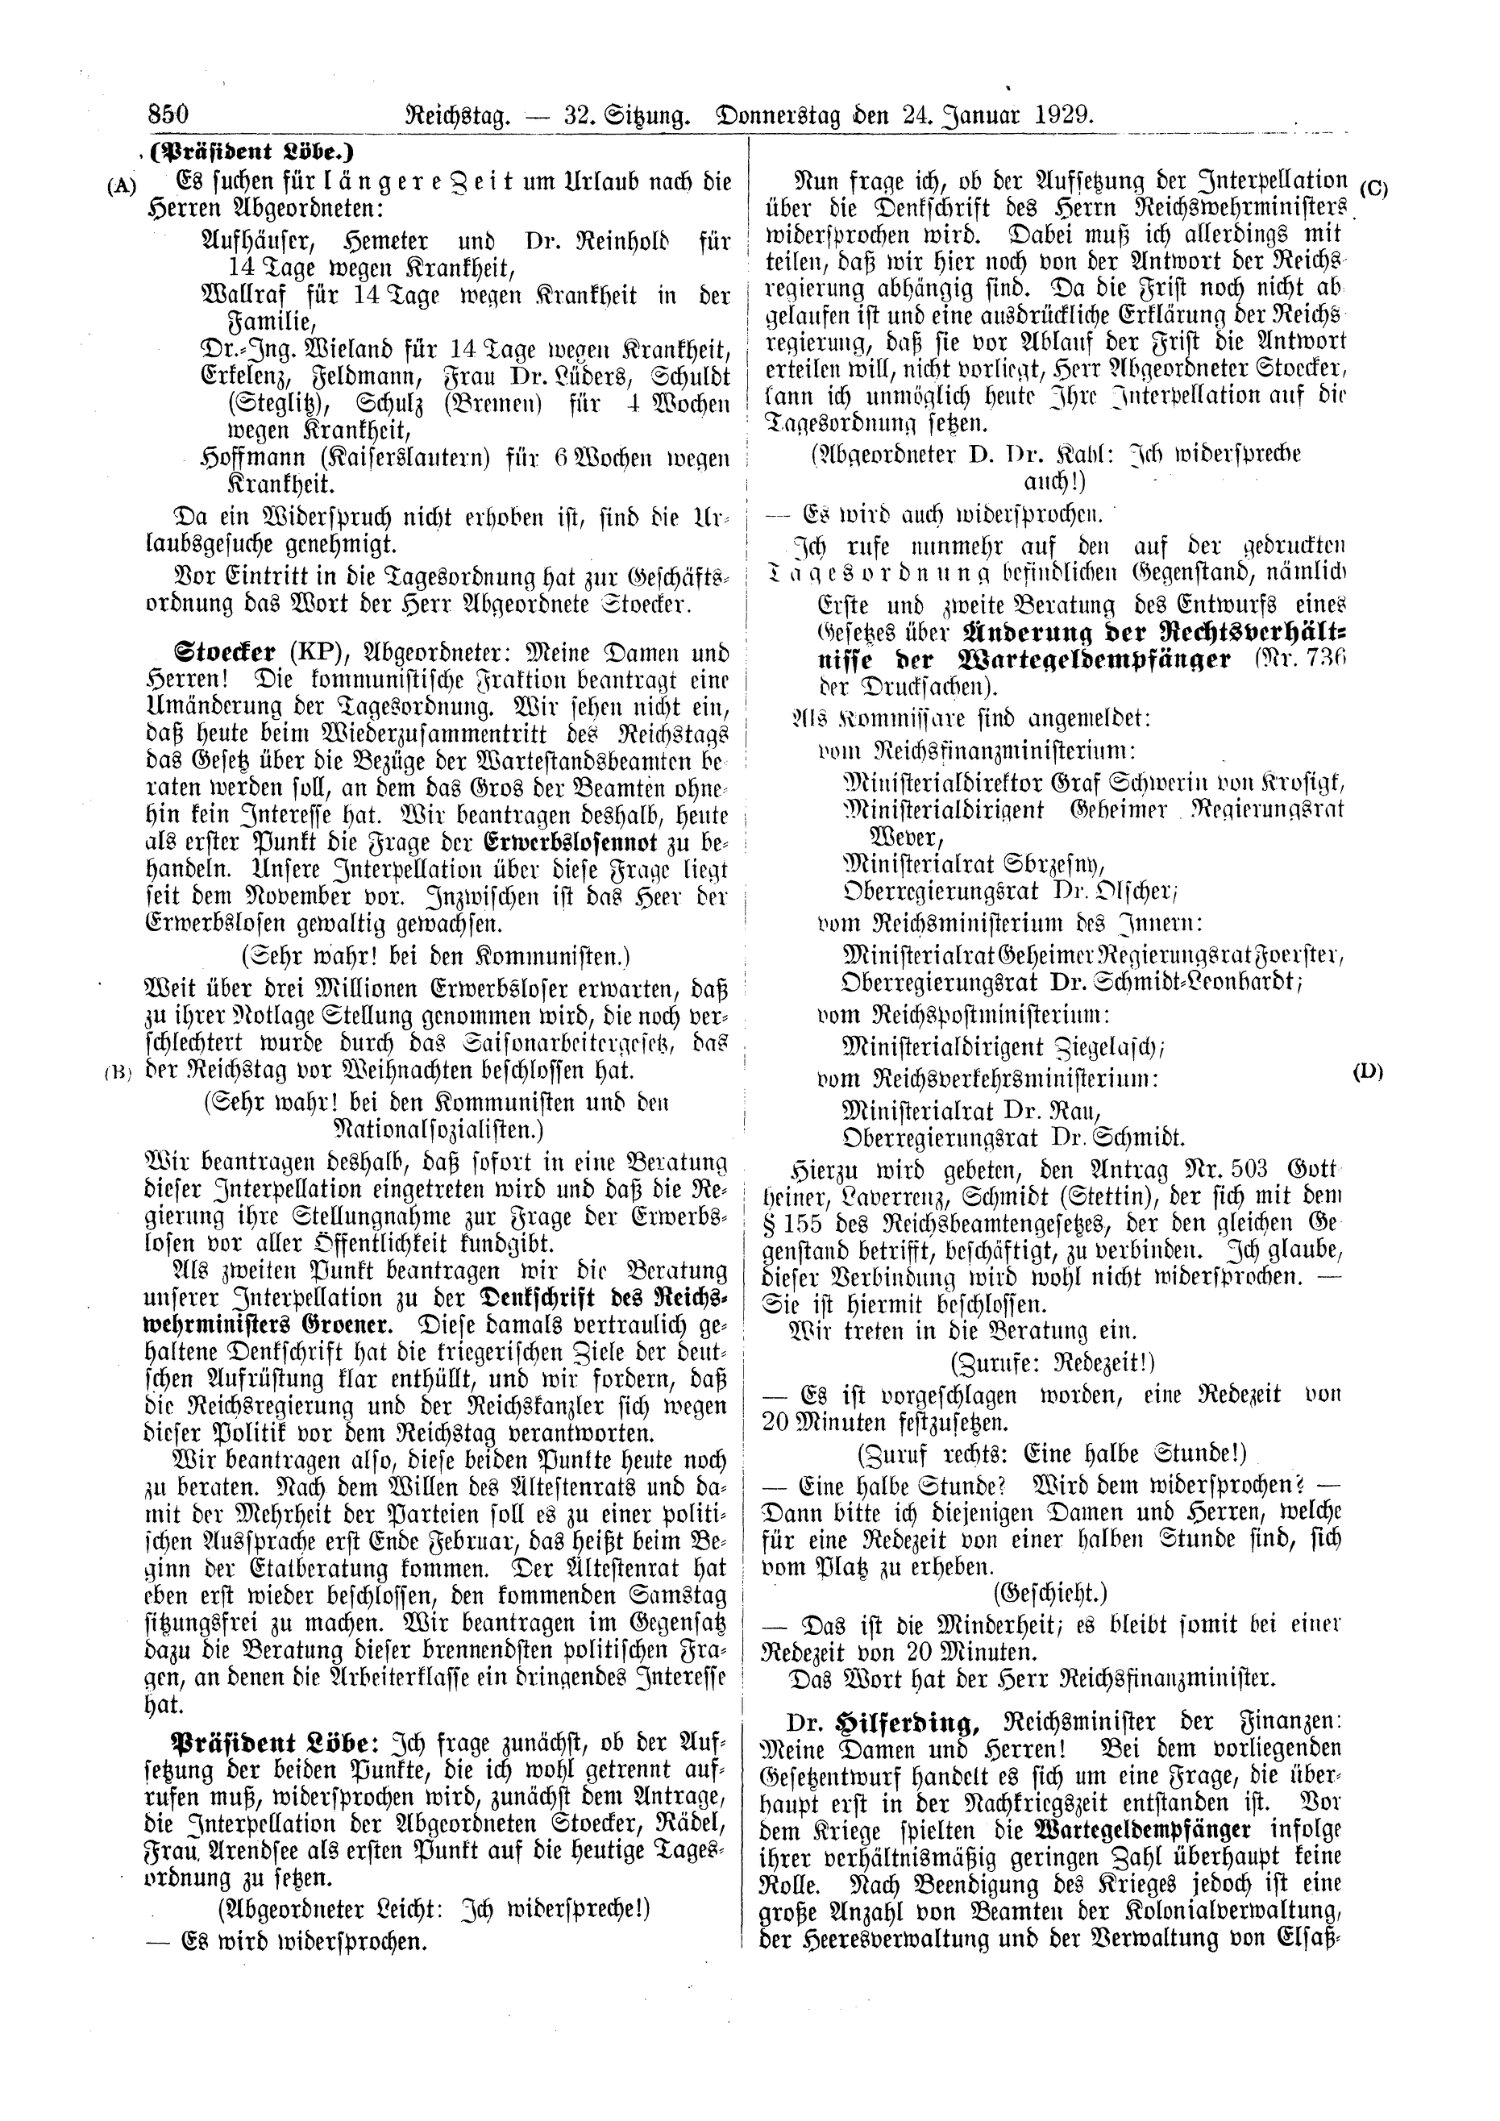 Scan of page 850